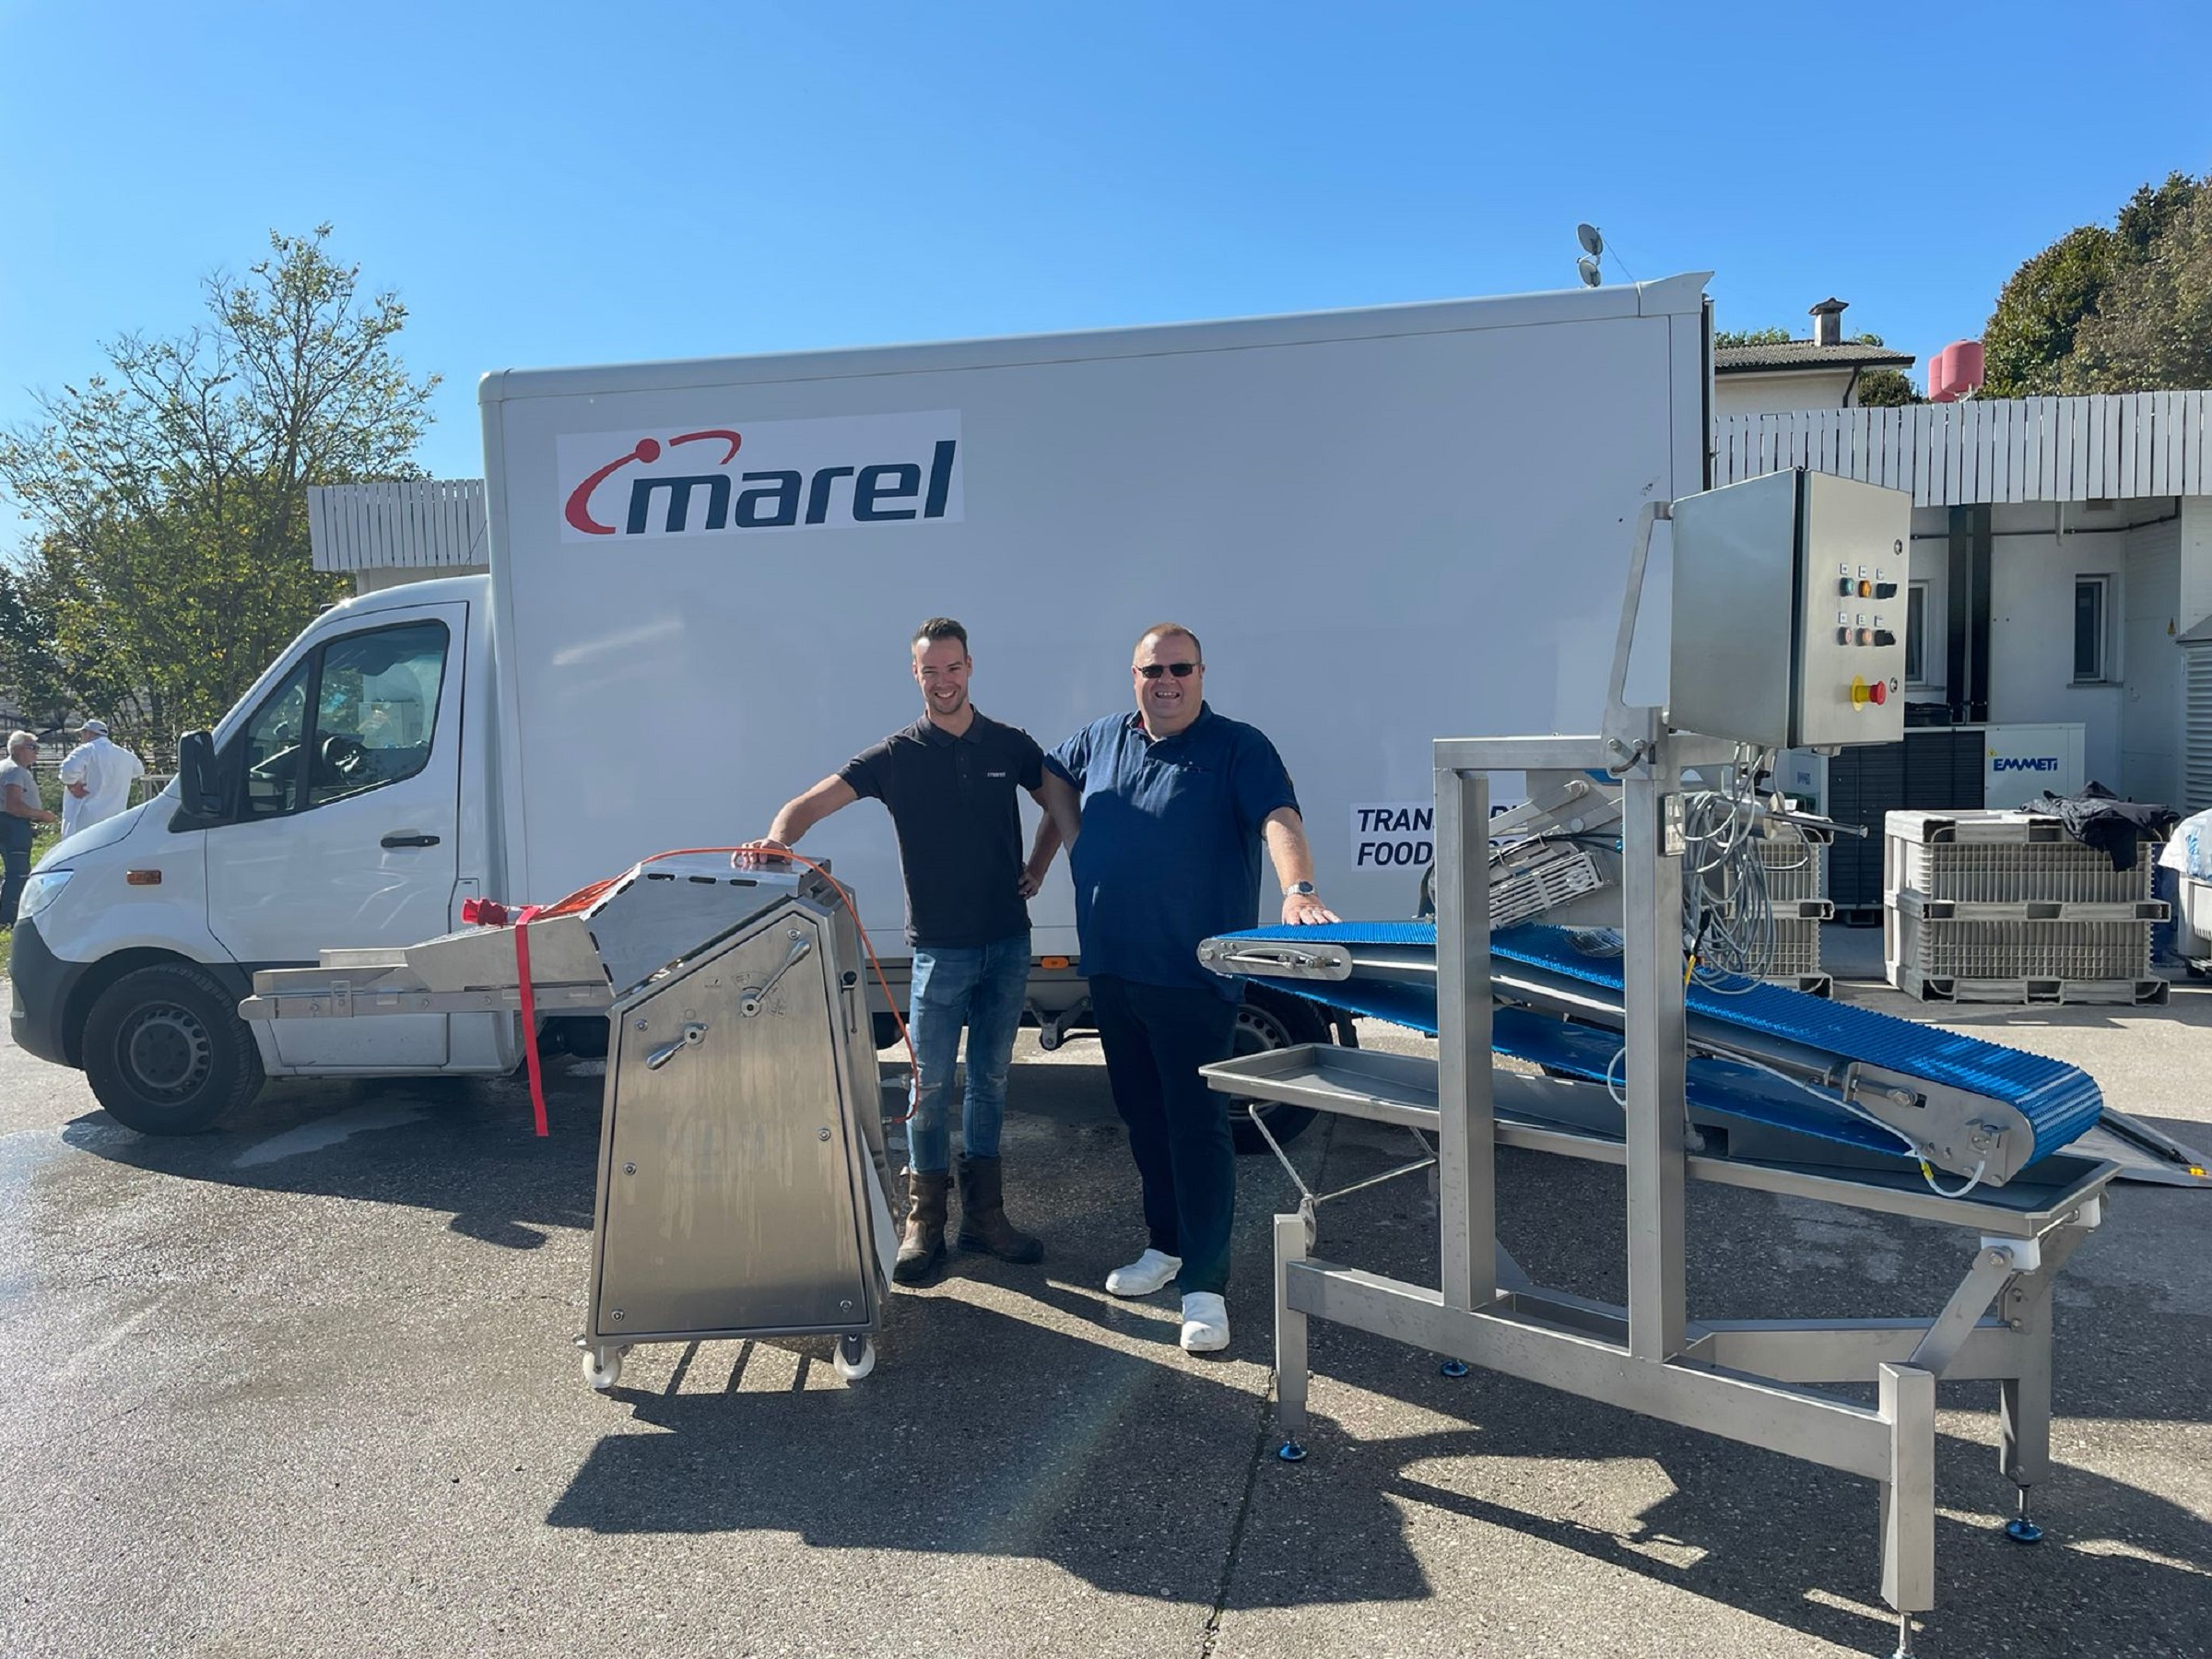 Dennis Vos with Marel equipment and truck